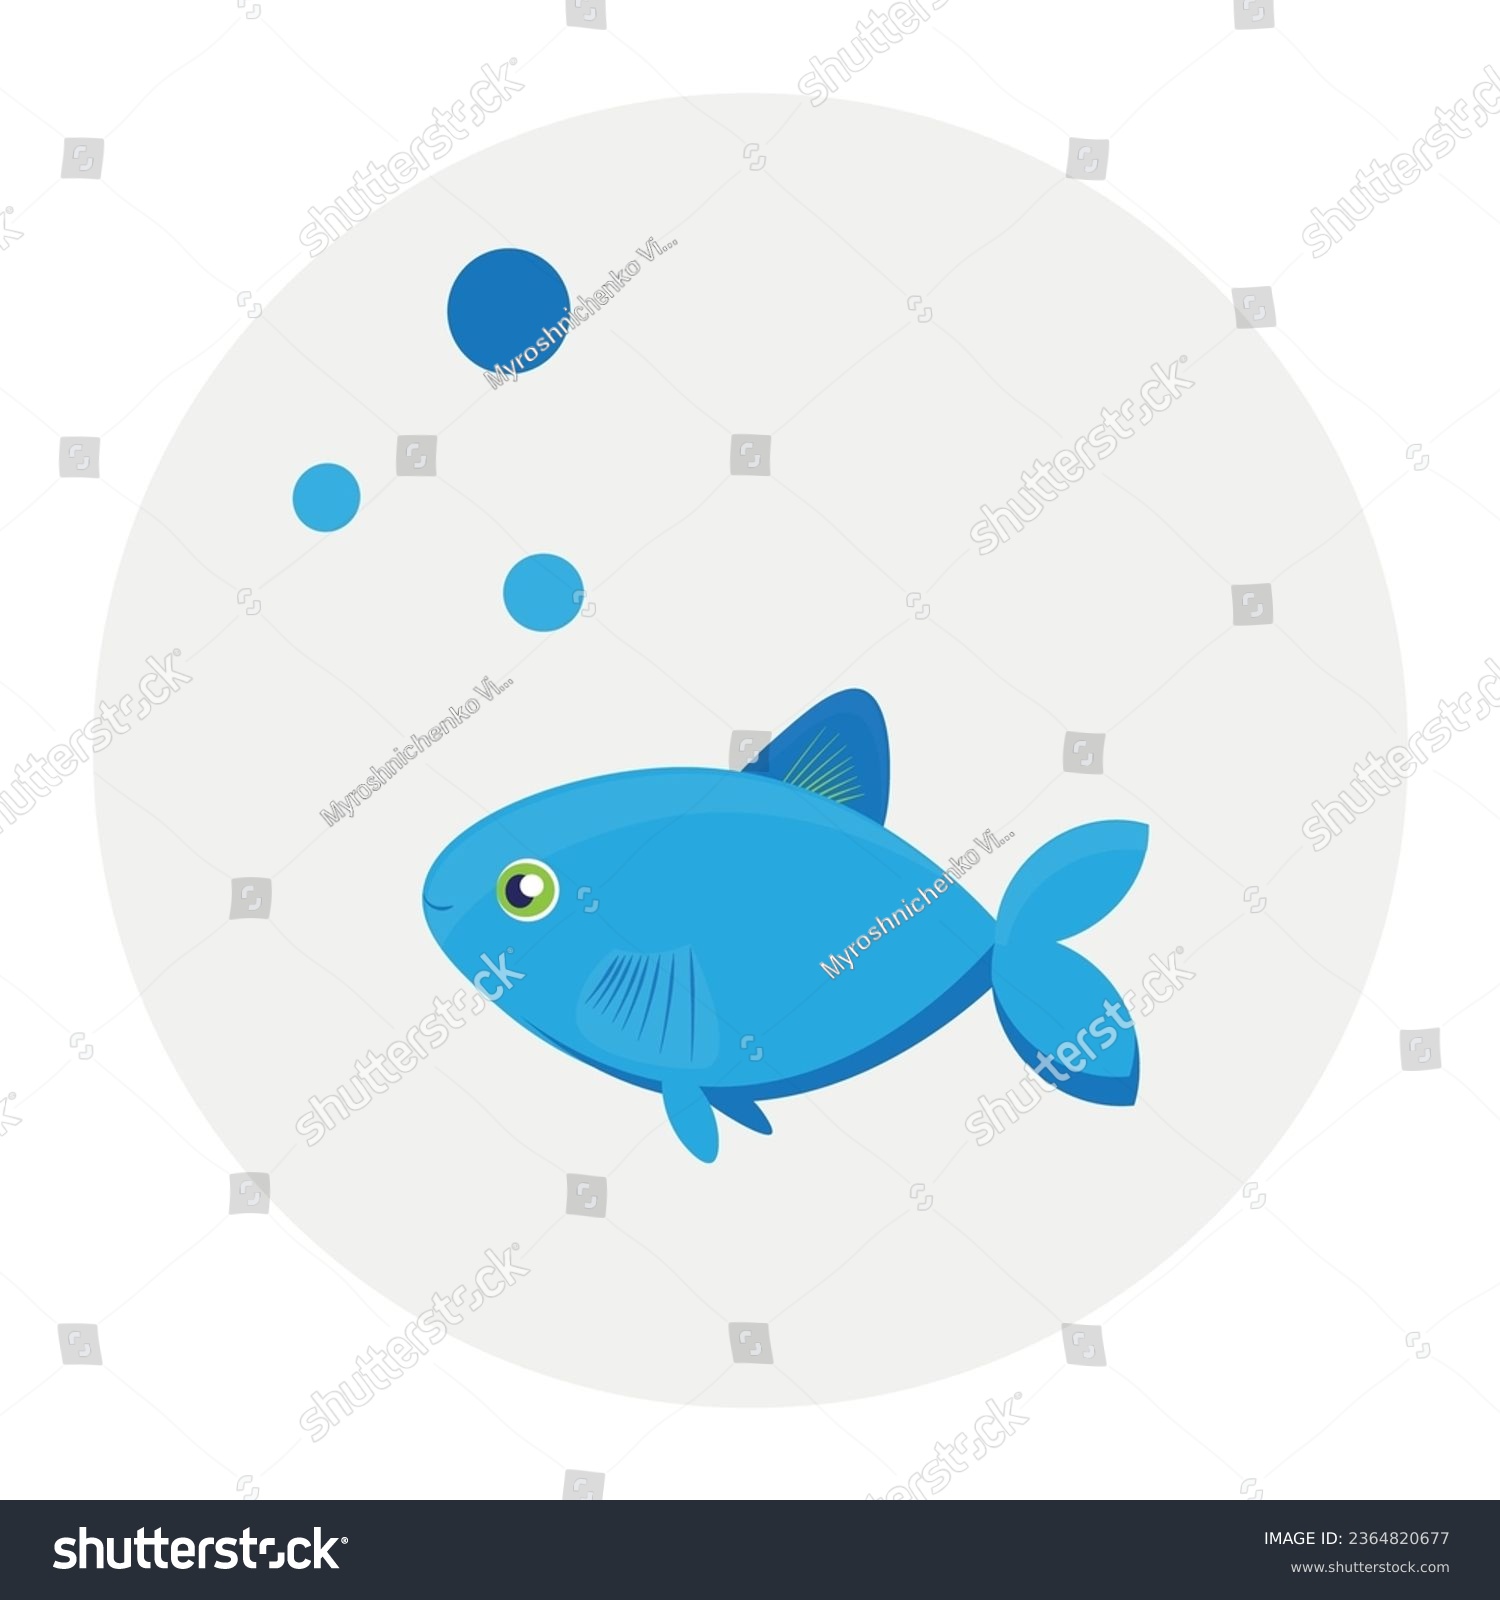 SVG of Vector fish icon. Vector flat illustration. Suitable for animation, using in web, apps, books, education projects. No transparency, solid colors only. Svg, lottie without bags. svg